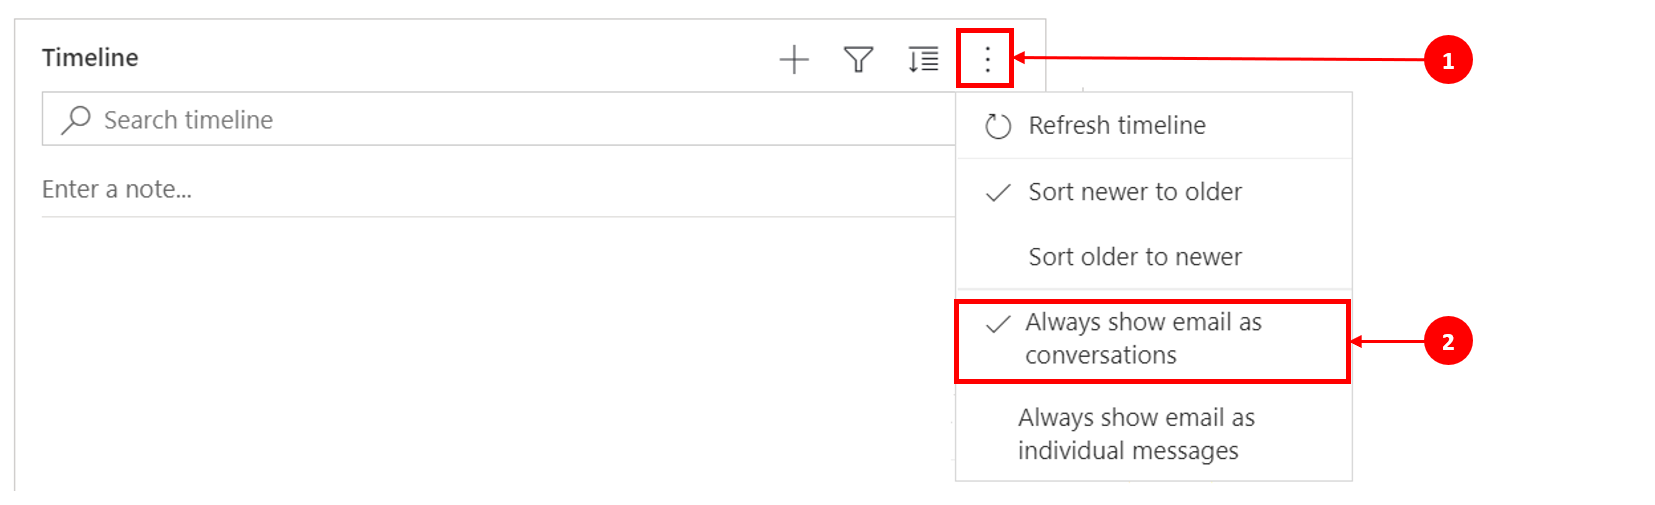 Enable threaded email view - option 1.